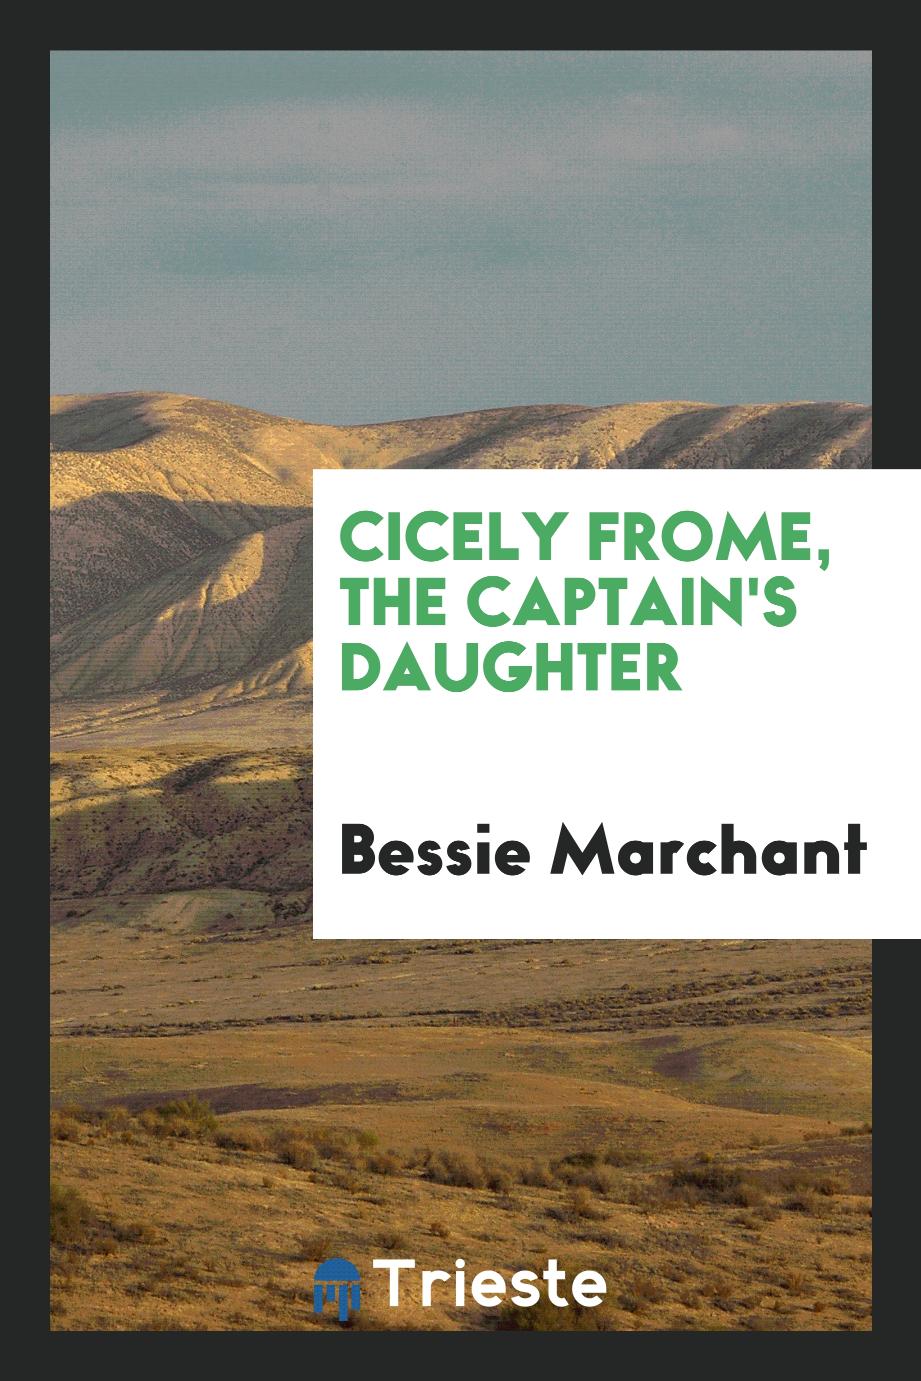 Cicely Frome, the captain's daughter